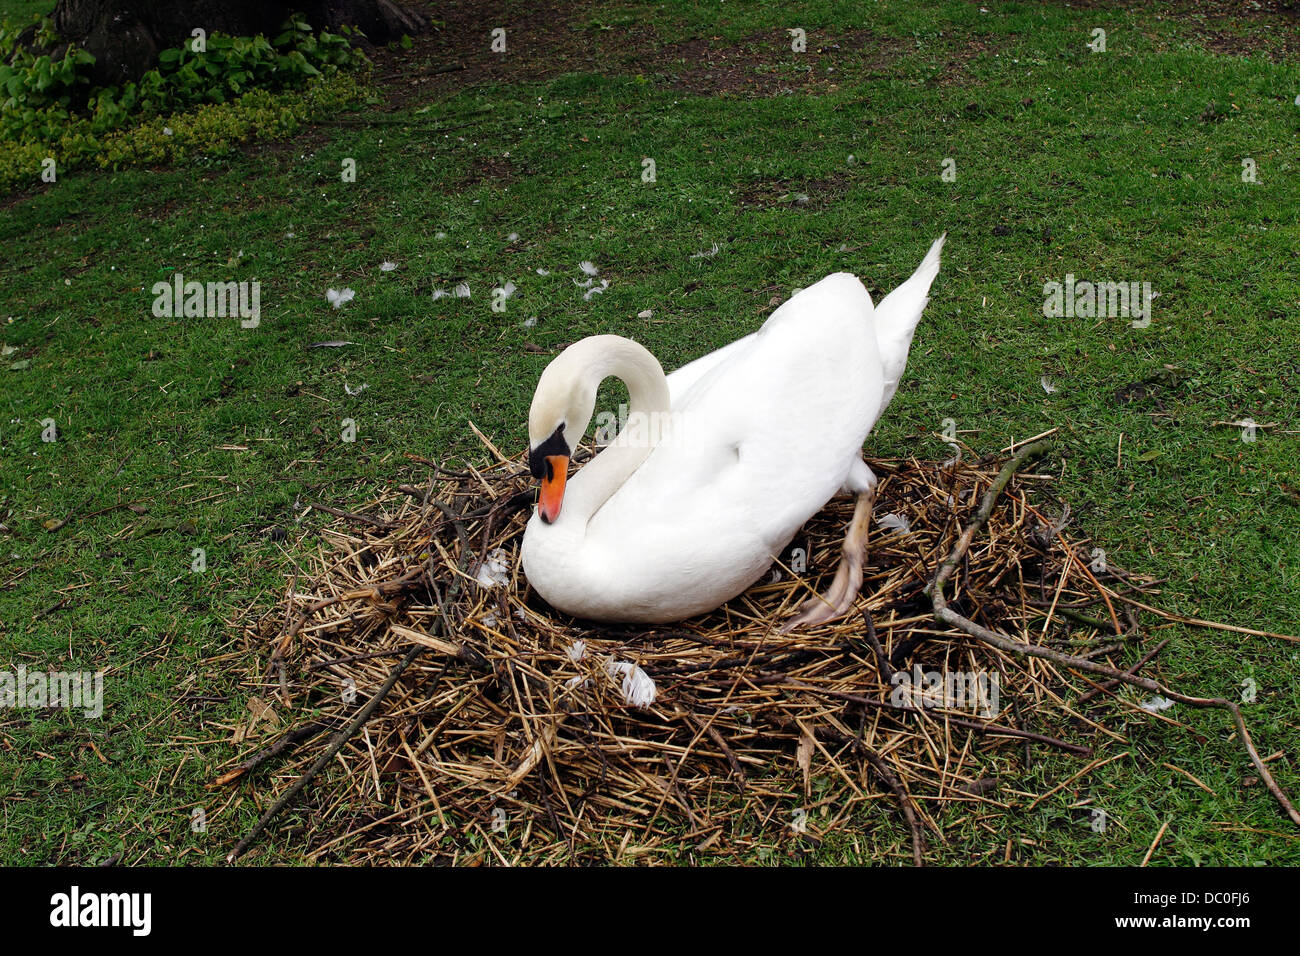 Bruges Belgium Flanders Europe Brugge white swan on nest in park by Minnewater Stock Photo